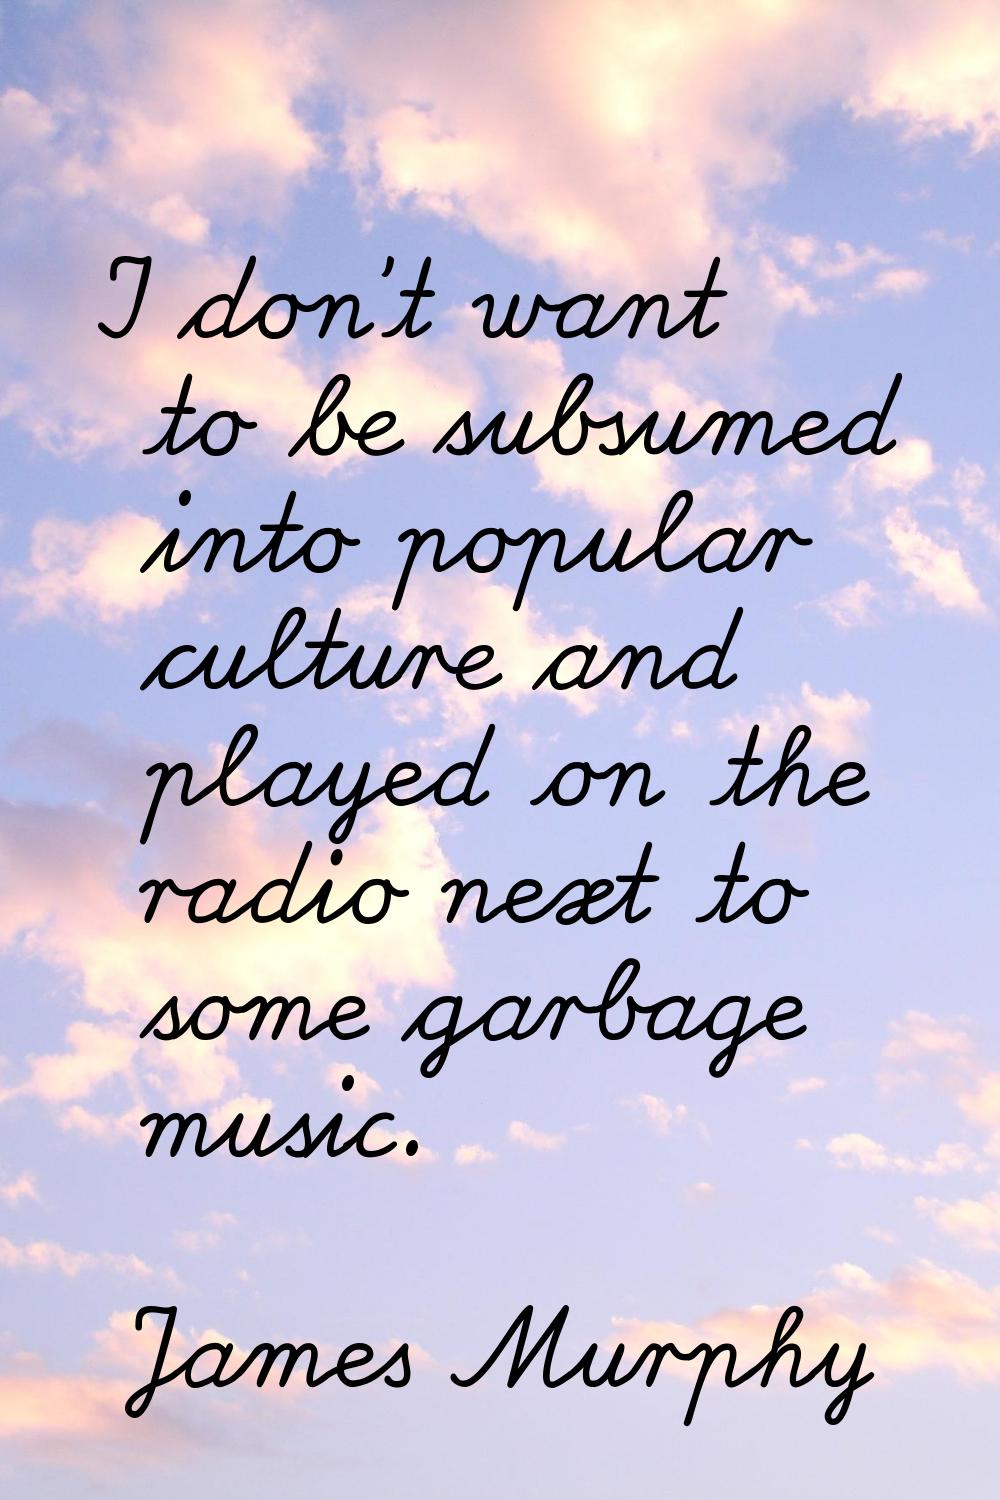 I don't want to be subsumed into popular culture and played on the radio next to some garbage music